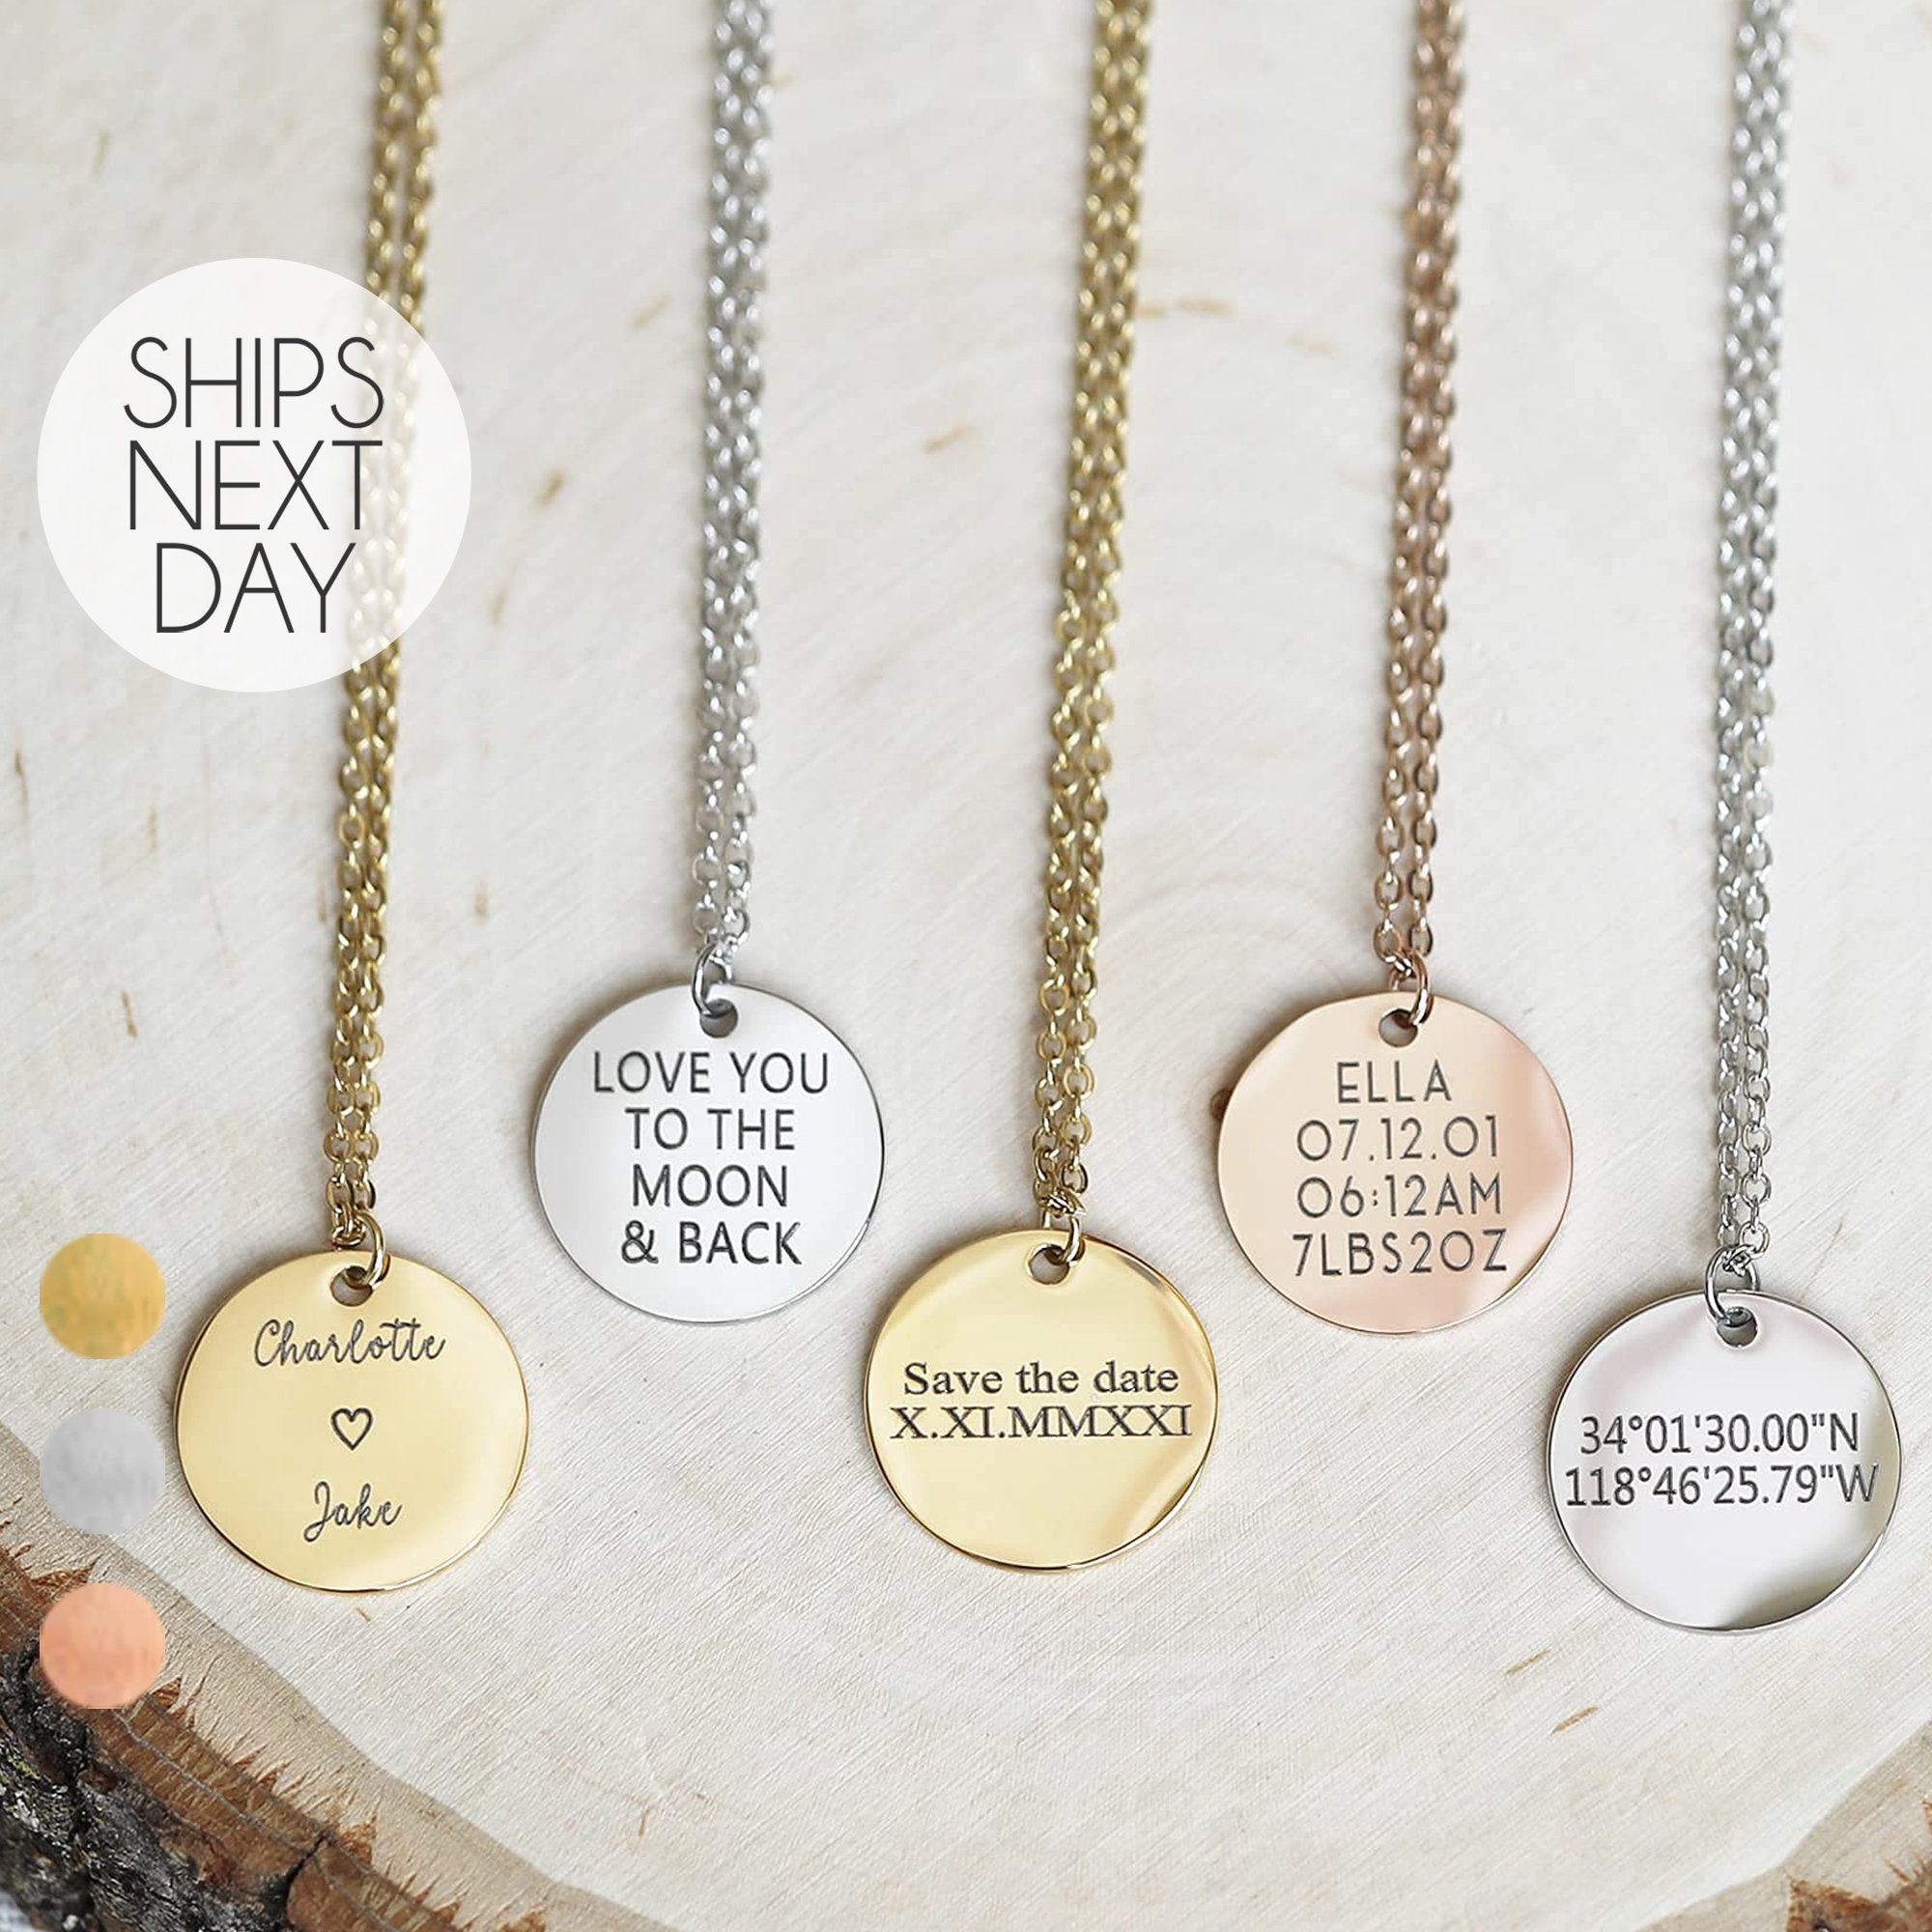 Personalized Stainless Steel Pendant Necklace With Custom Name And Date  Round Coin Birth Flower Necklace For Women Perfect Family Gift X0905 From  Hobo_designers, $5.78 | DHgate.Com